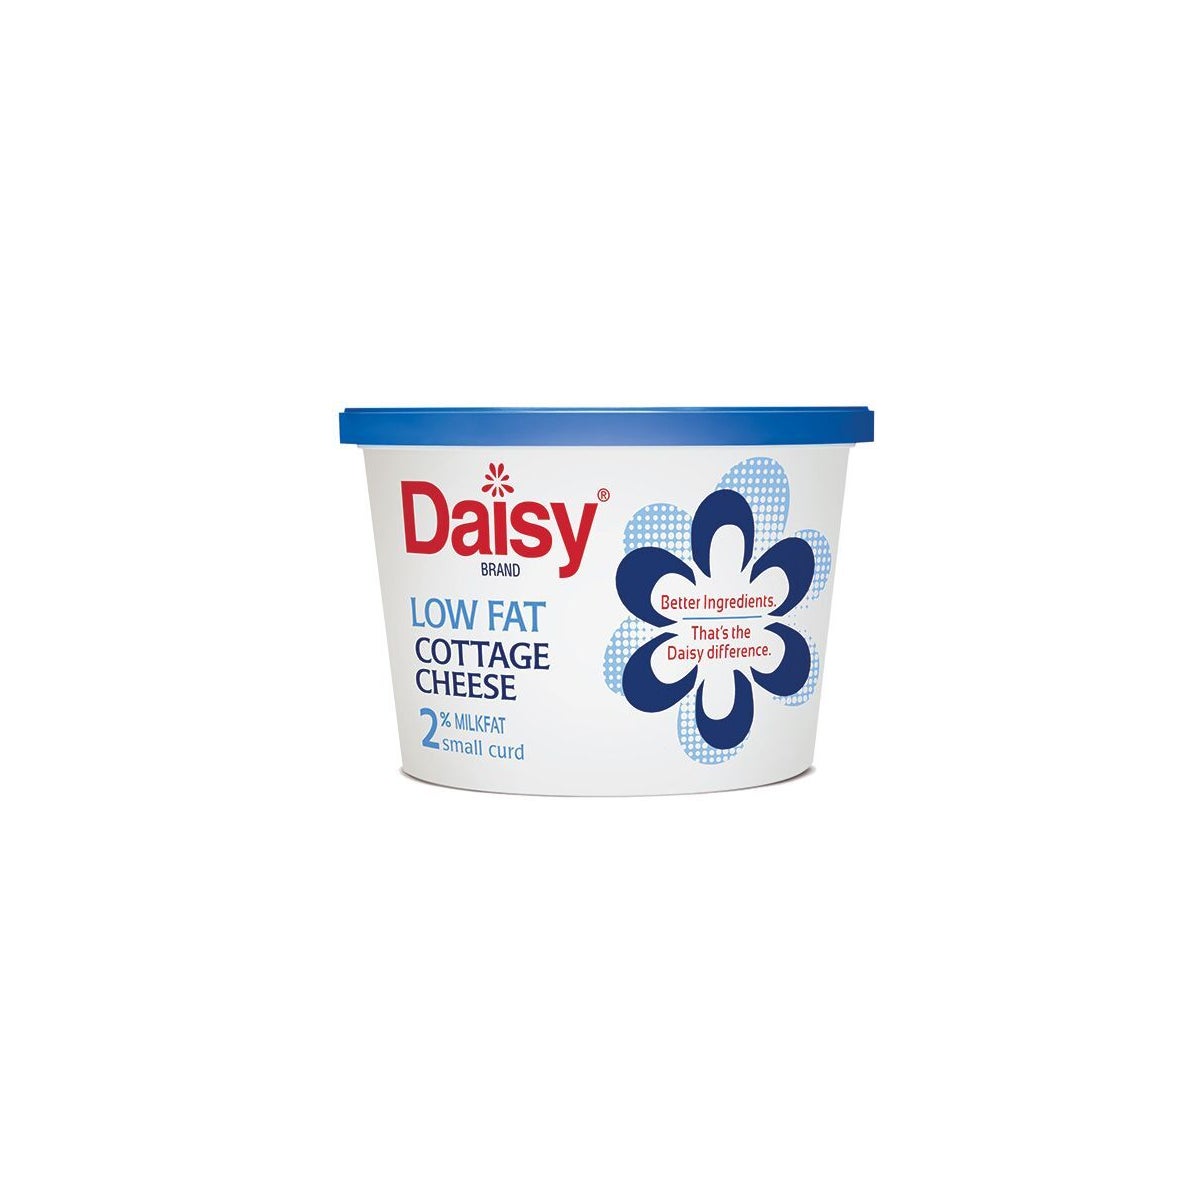 DAISY COTTAGE CHEESE LOW FAT 2% MILKFAT 16OZ